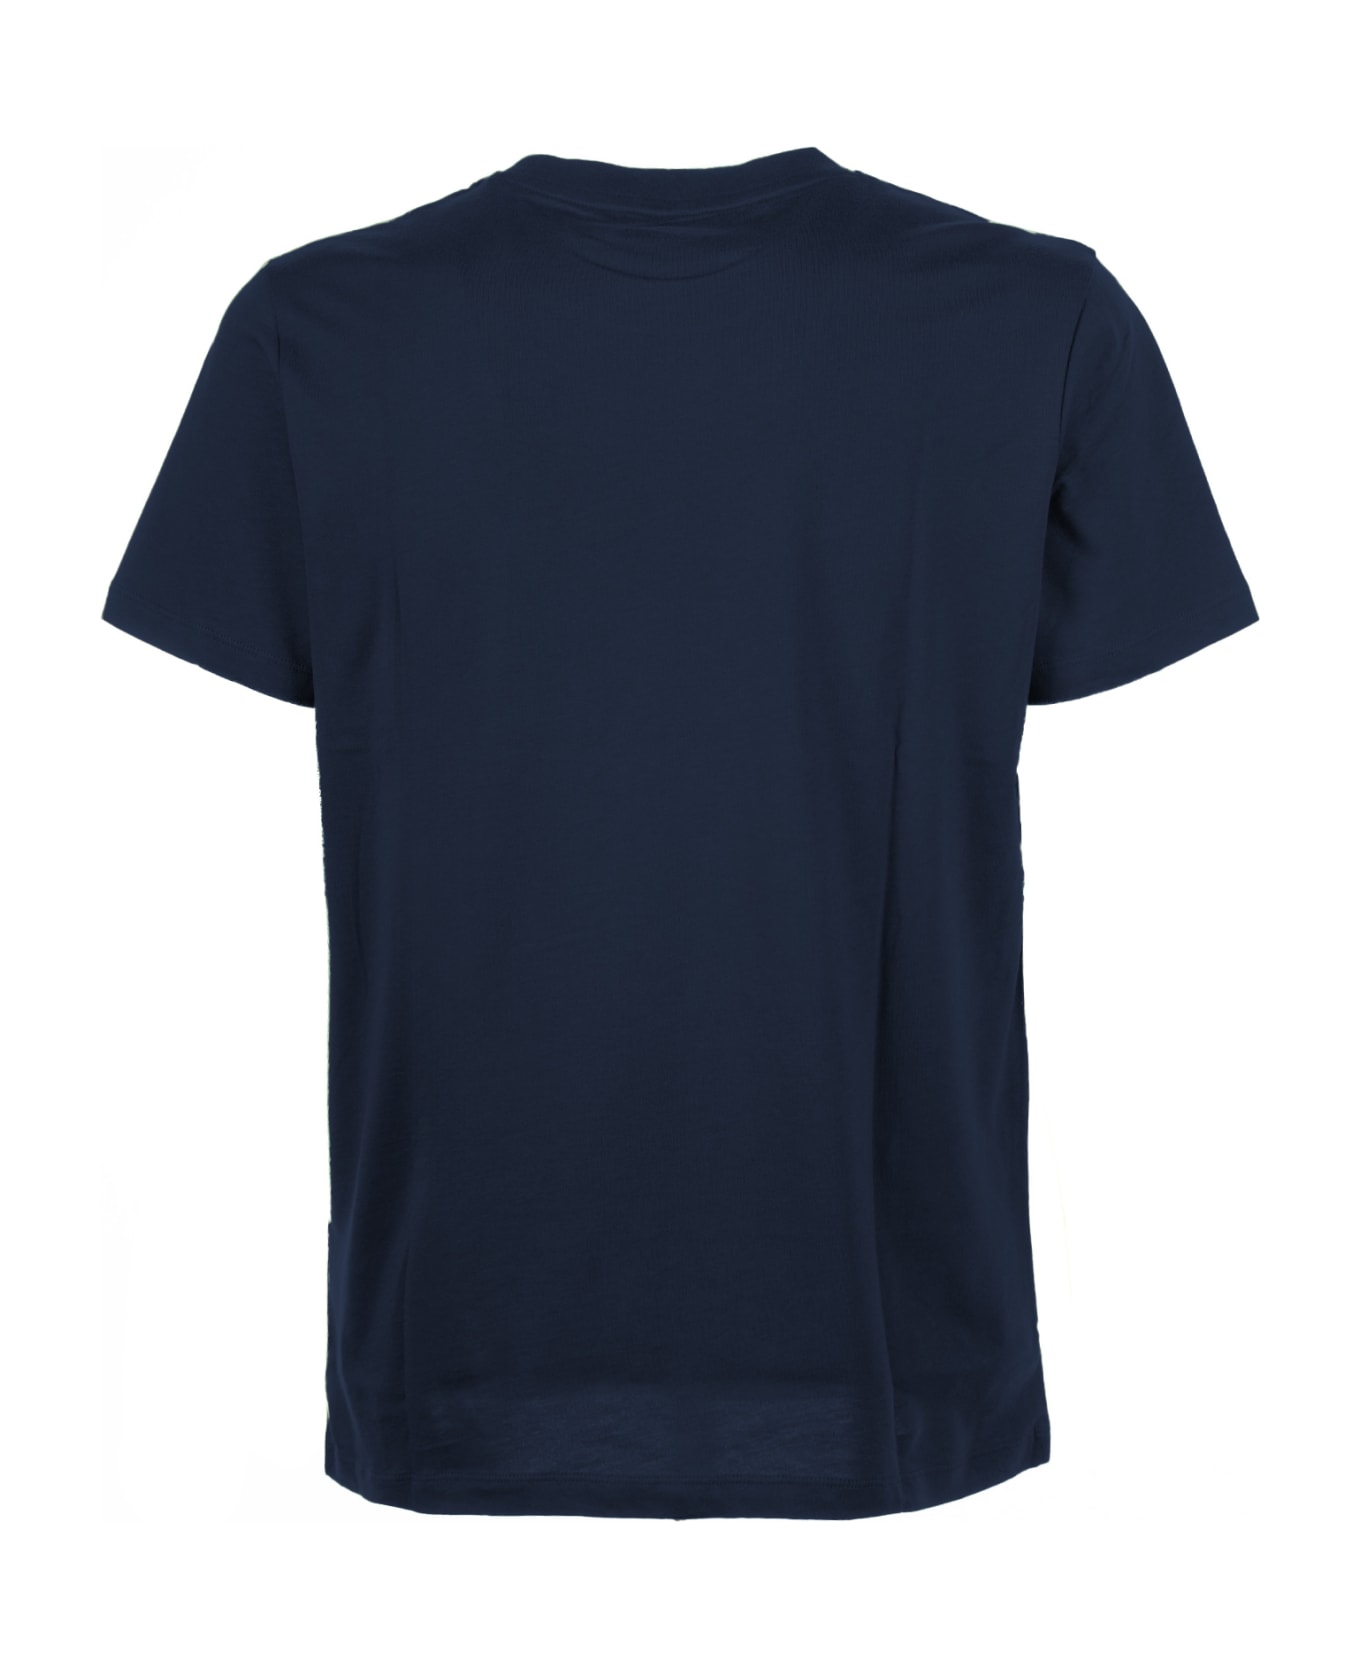 Peuterey Navy Blue T-shirt With Pocket - Blu